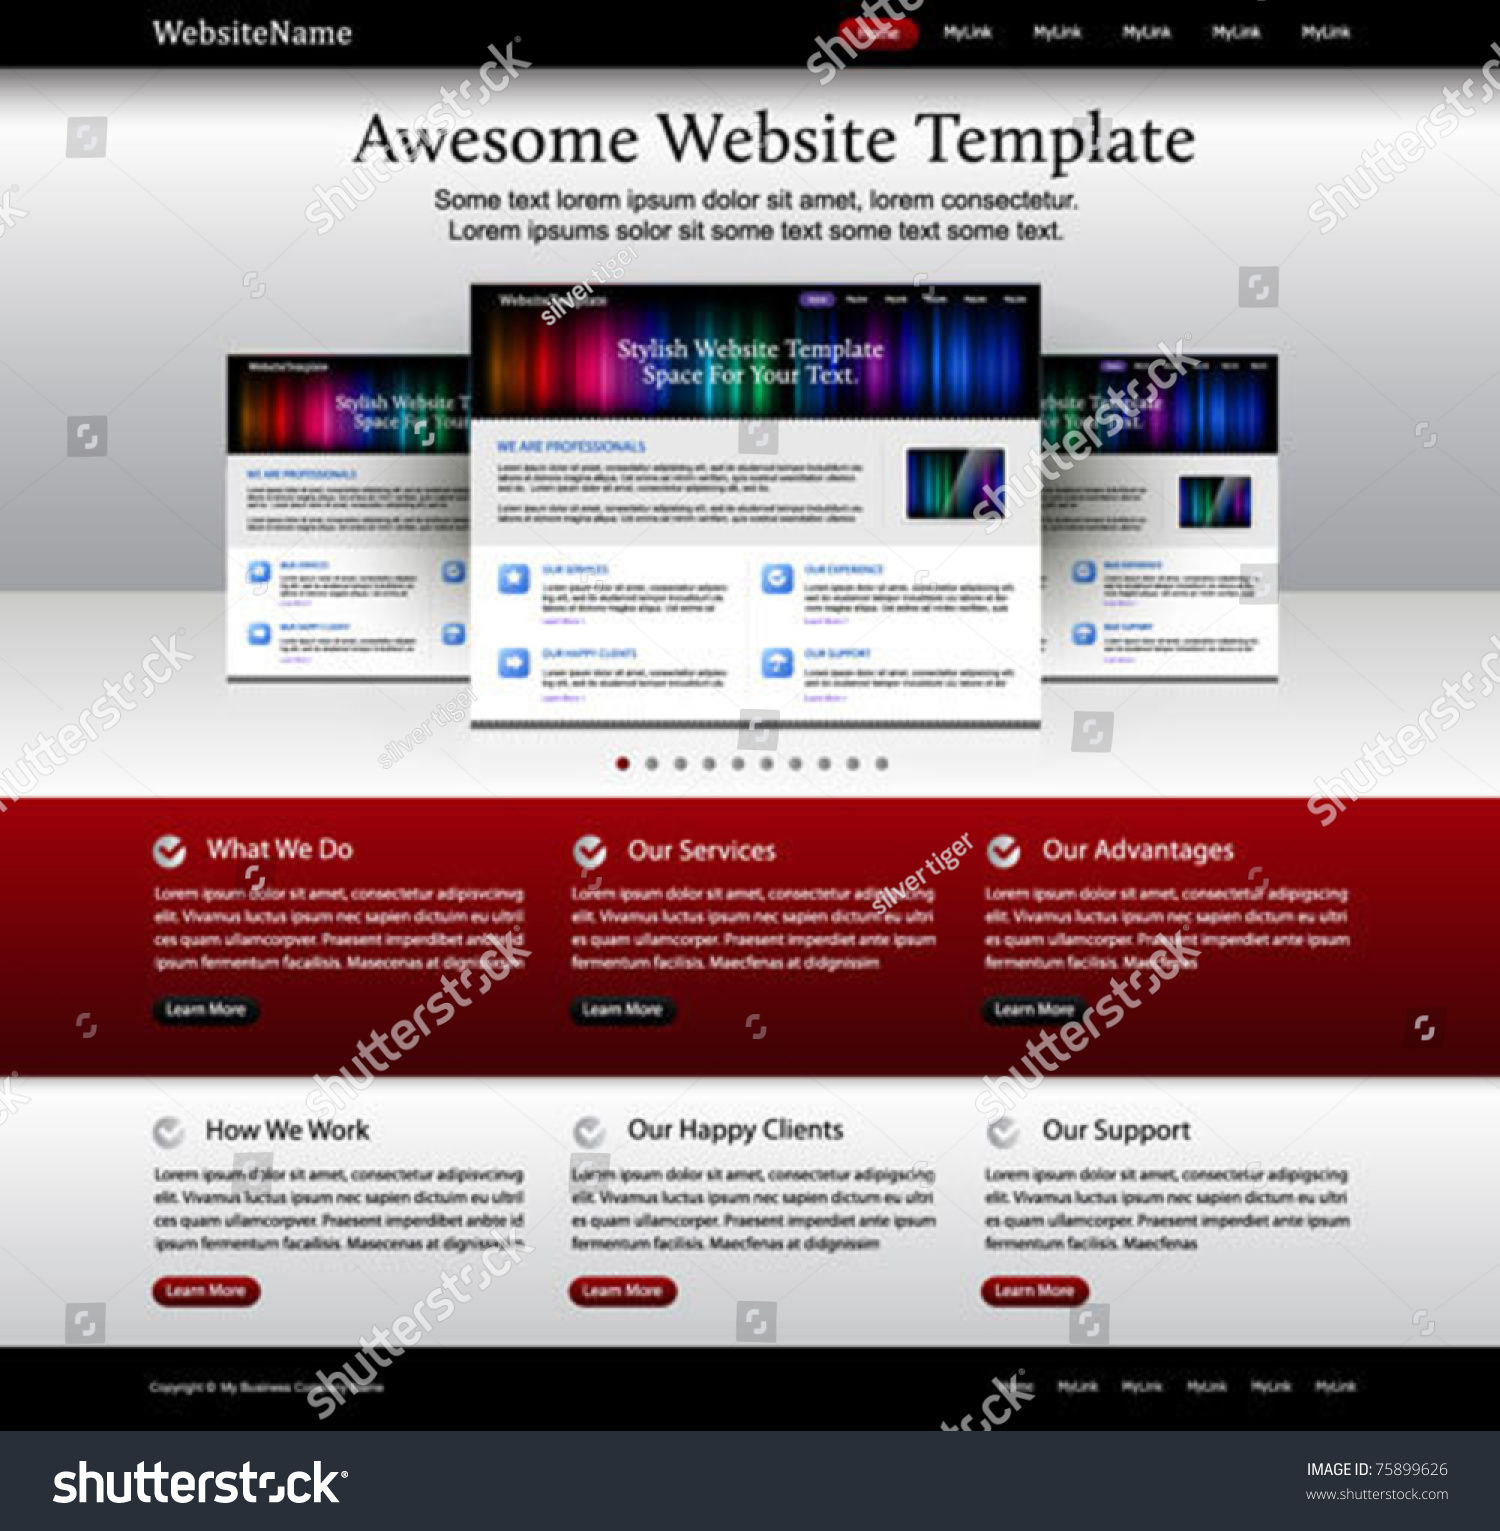 Website Template Metallic Red White Black Stock Vector Royalty Free 75899626